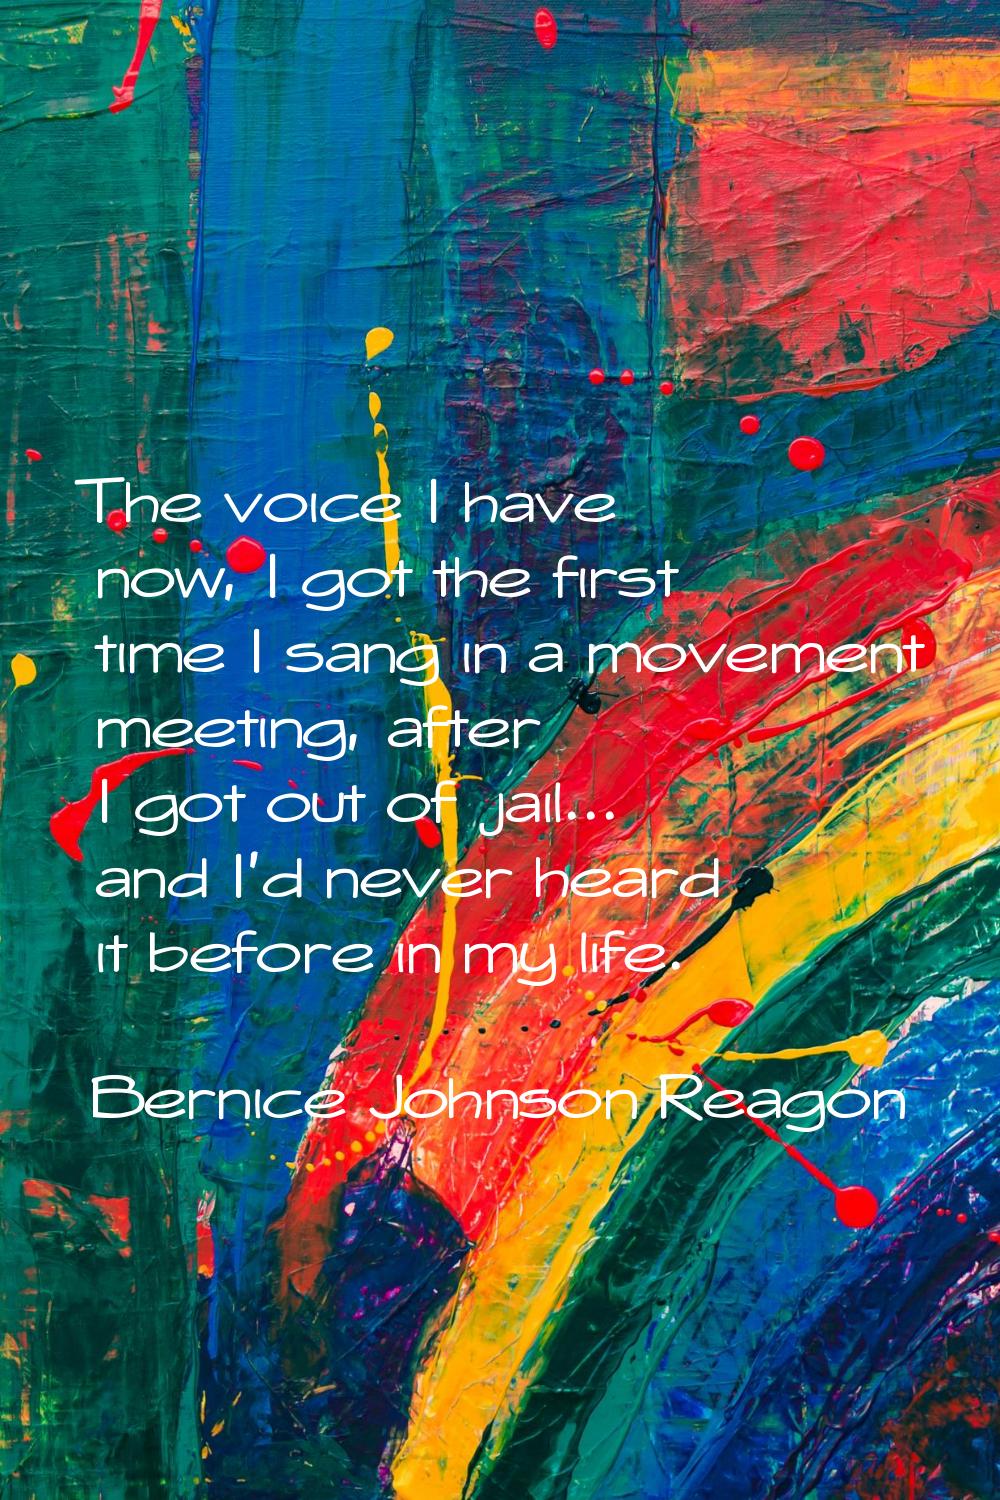 The voice I have now, I got the first time I sang in a movement meeting, after I got out of jail...